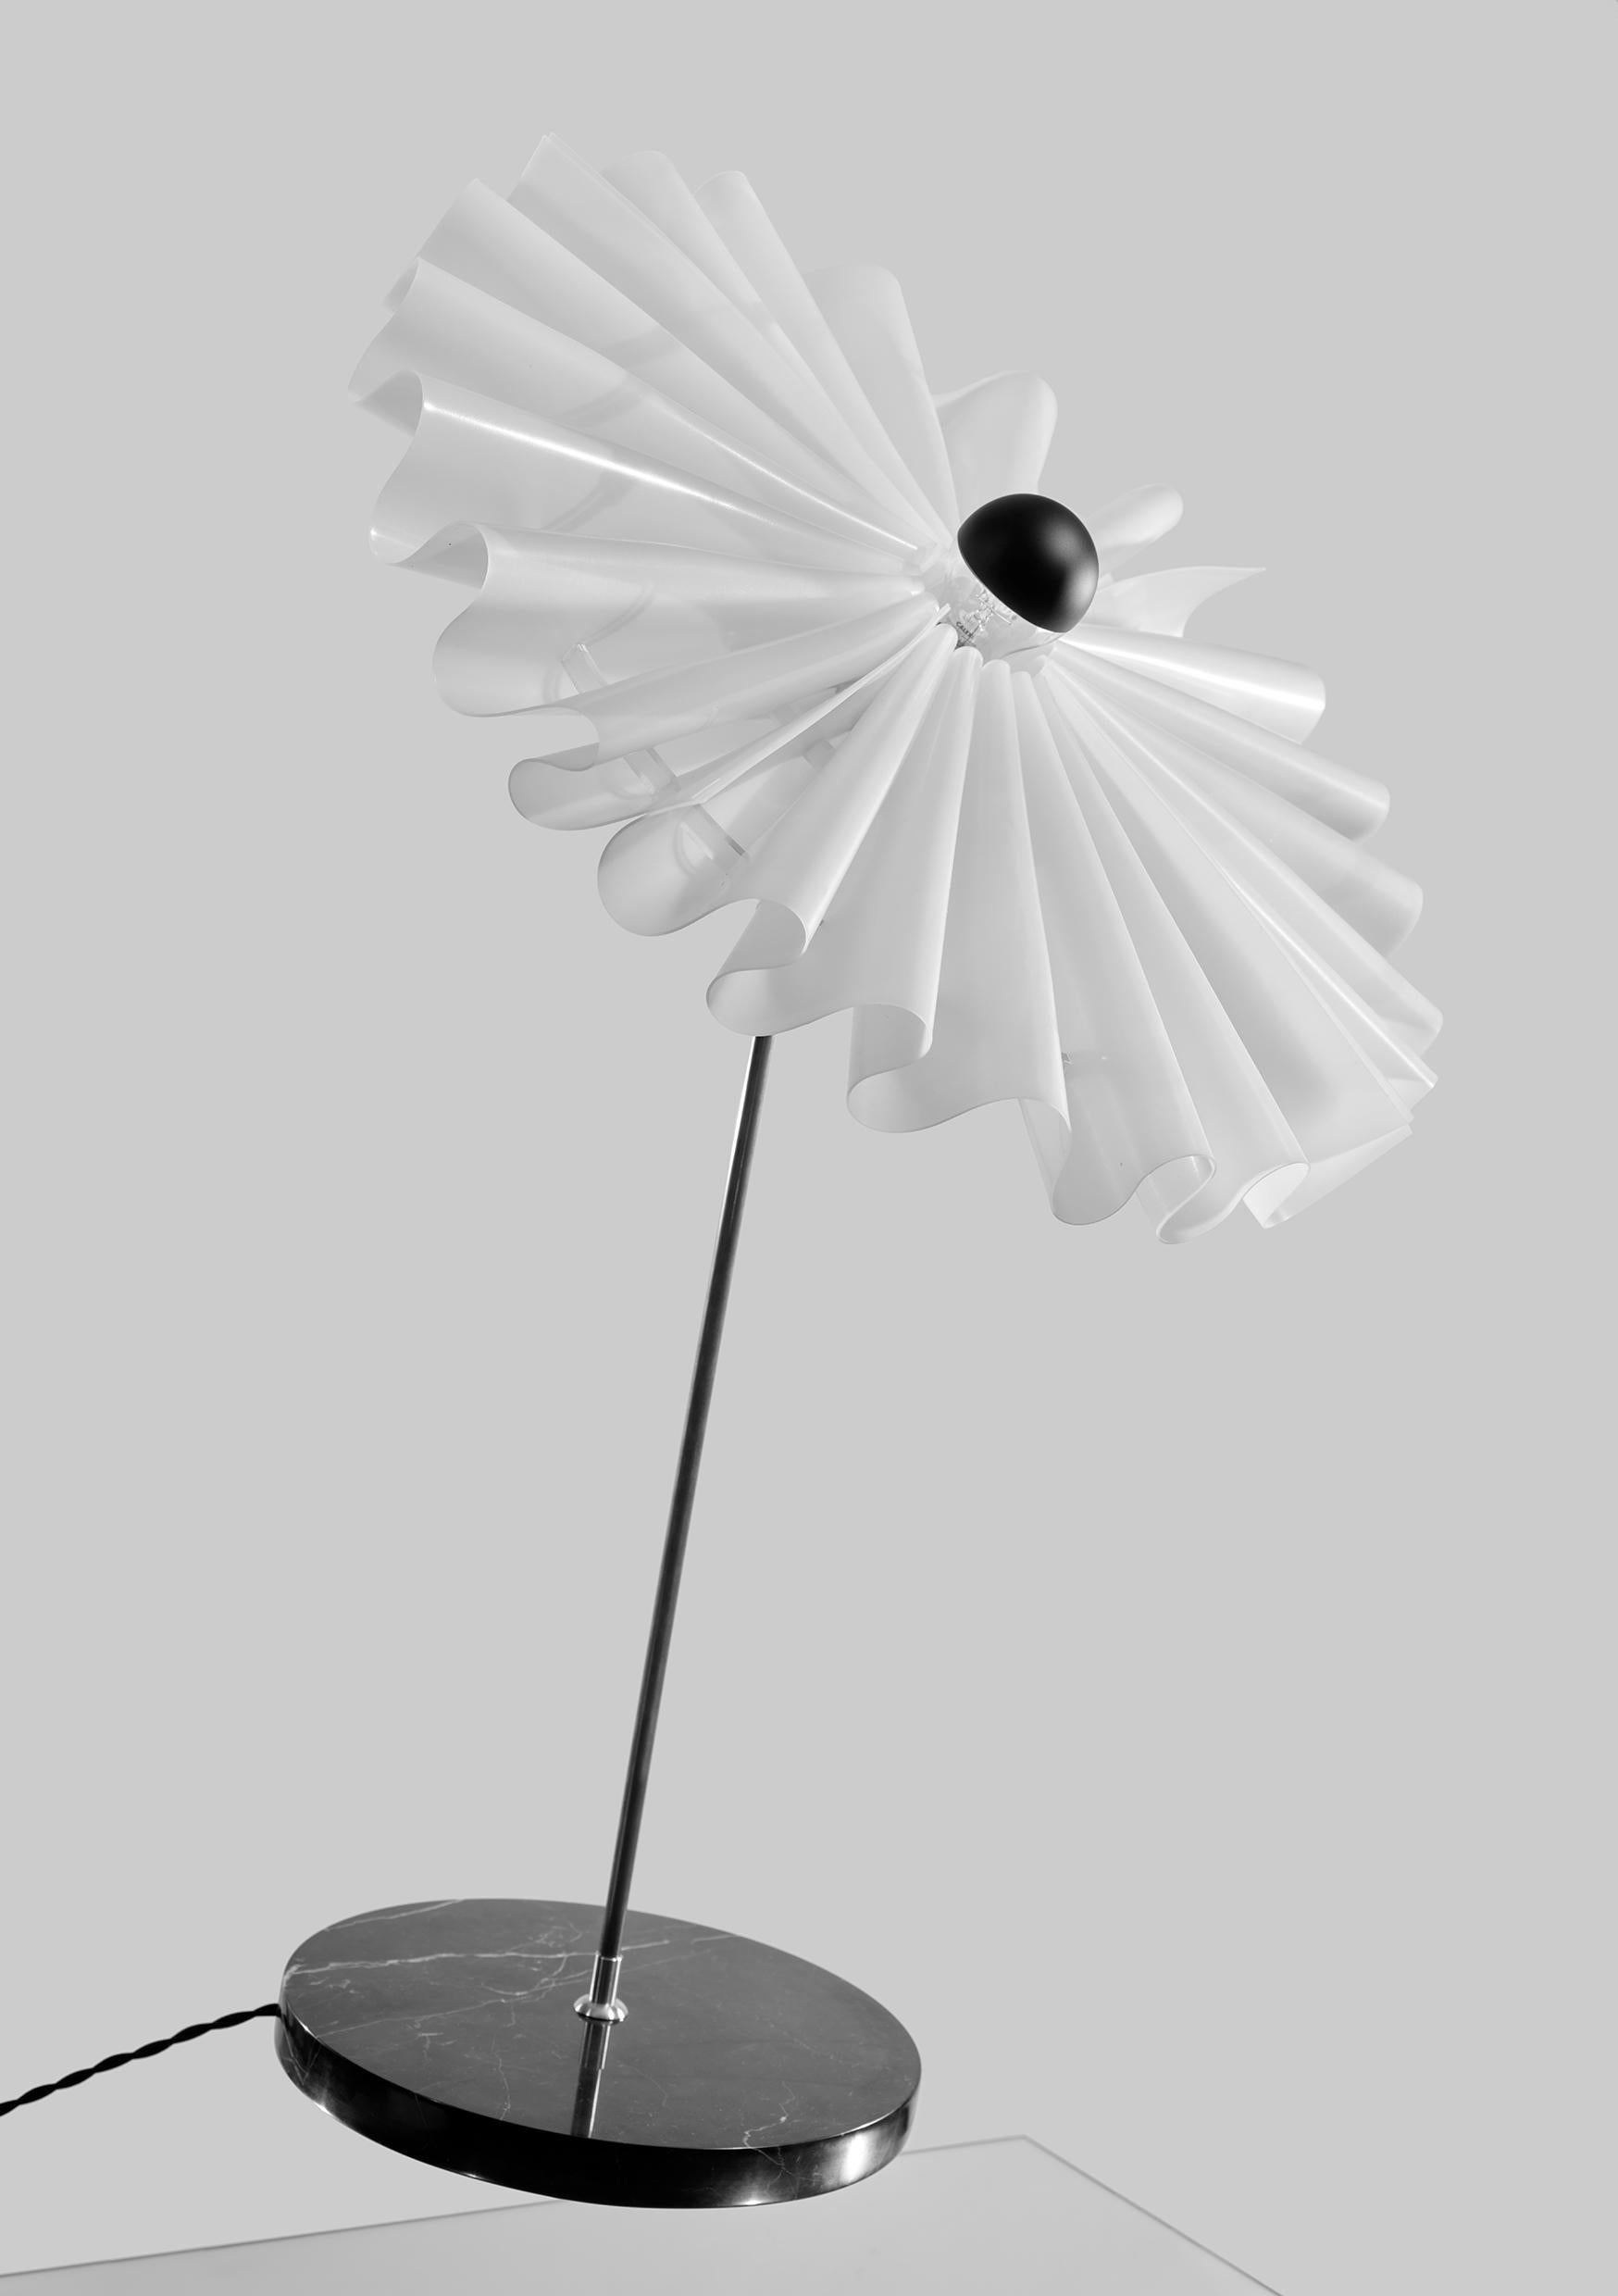 The Ballerina table lamp by Elise Luttik
Dimensions: D 53 x H 50 cm
Materials: Silicon translucent tutu, brass, marble base.
Available in 2 sizes: H 40, H 50 cm.

Elise Luttik materialises the illusion of ballet on your table. The Ballerina, a table